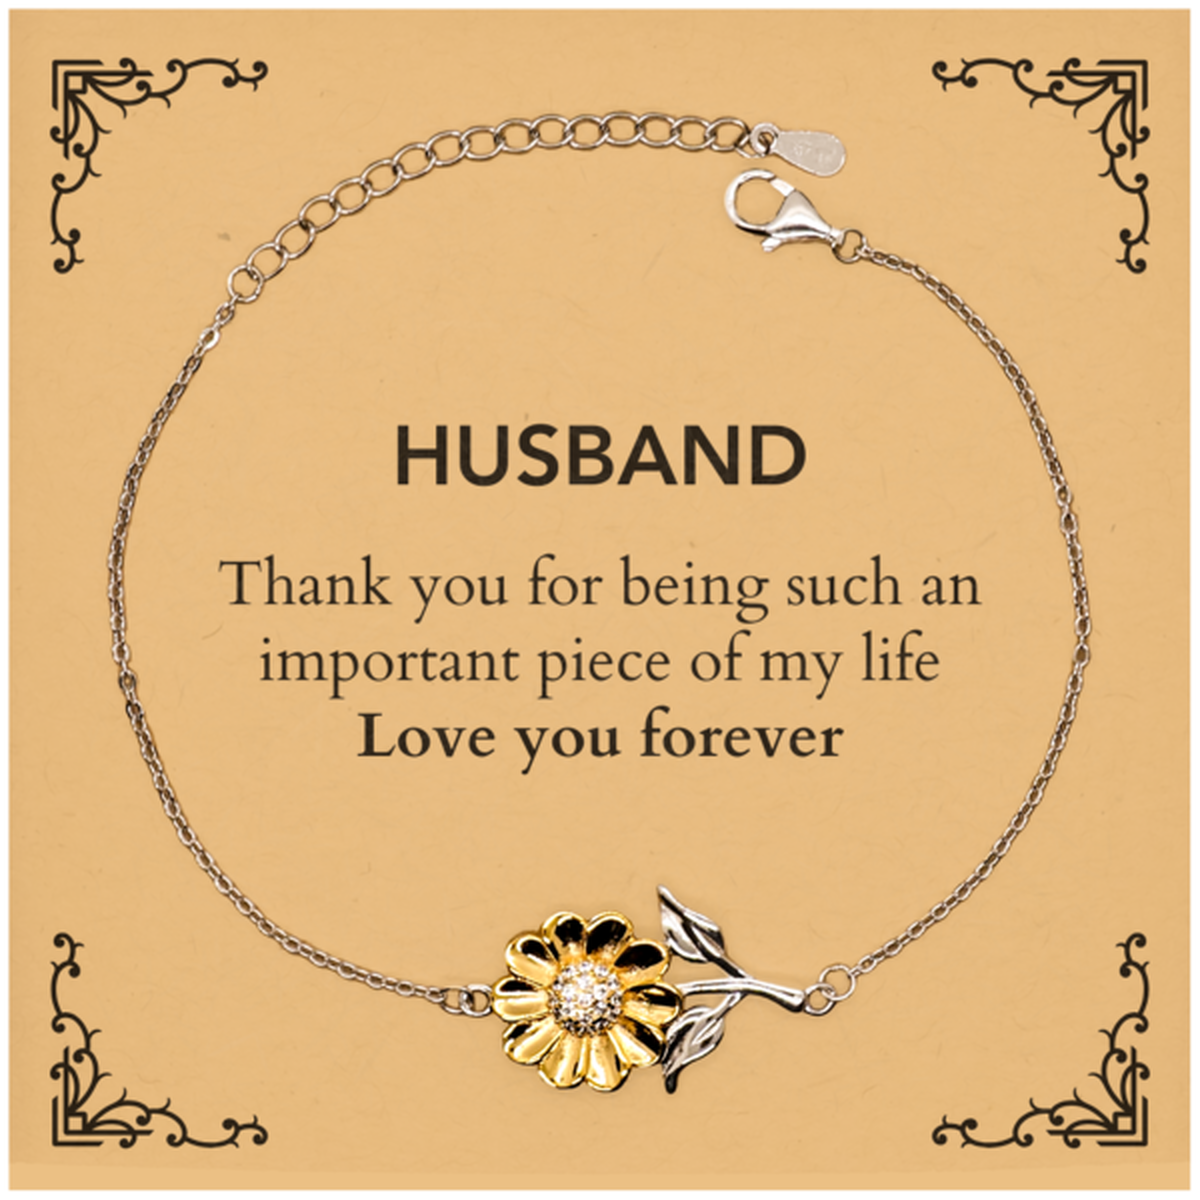 Appropriate Husband Sunflower Bracelet Epic Birthday Gifts for Husband Thank you for being such an important piece of my life Husband Christmas Mothers Fathers Day